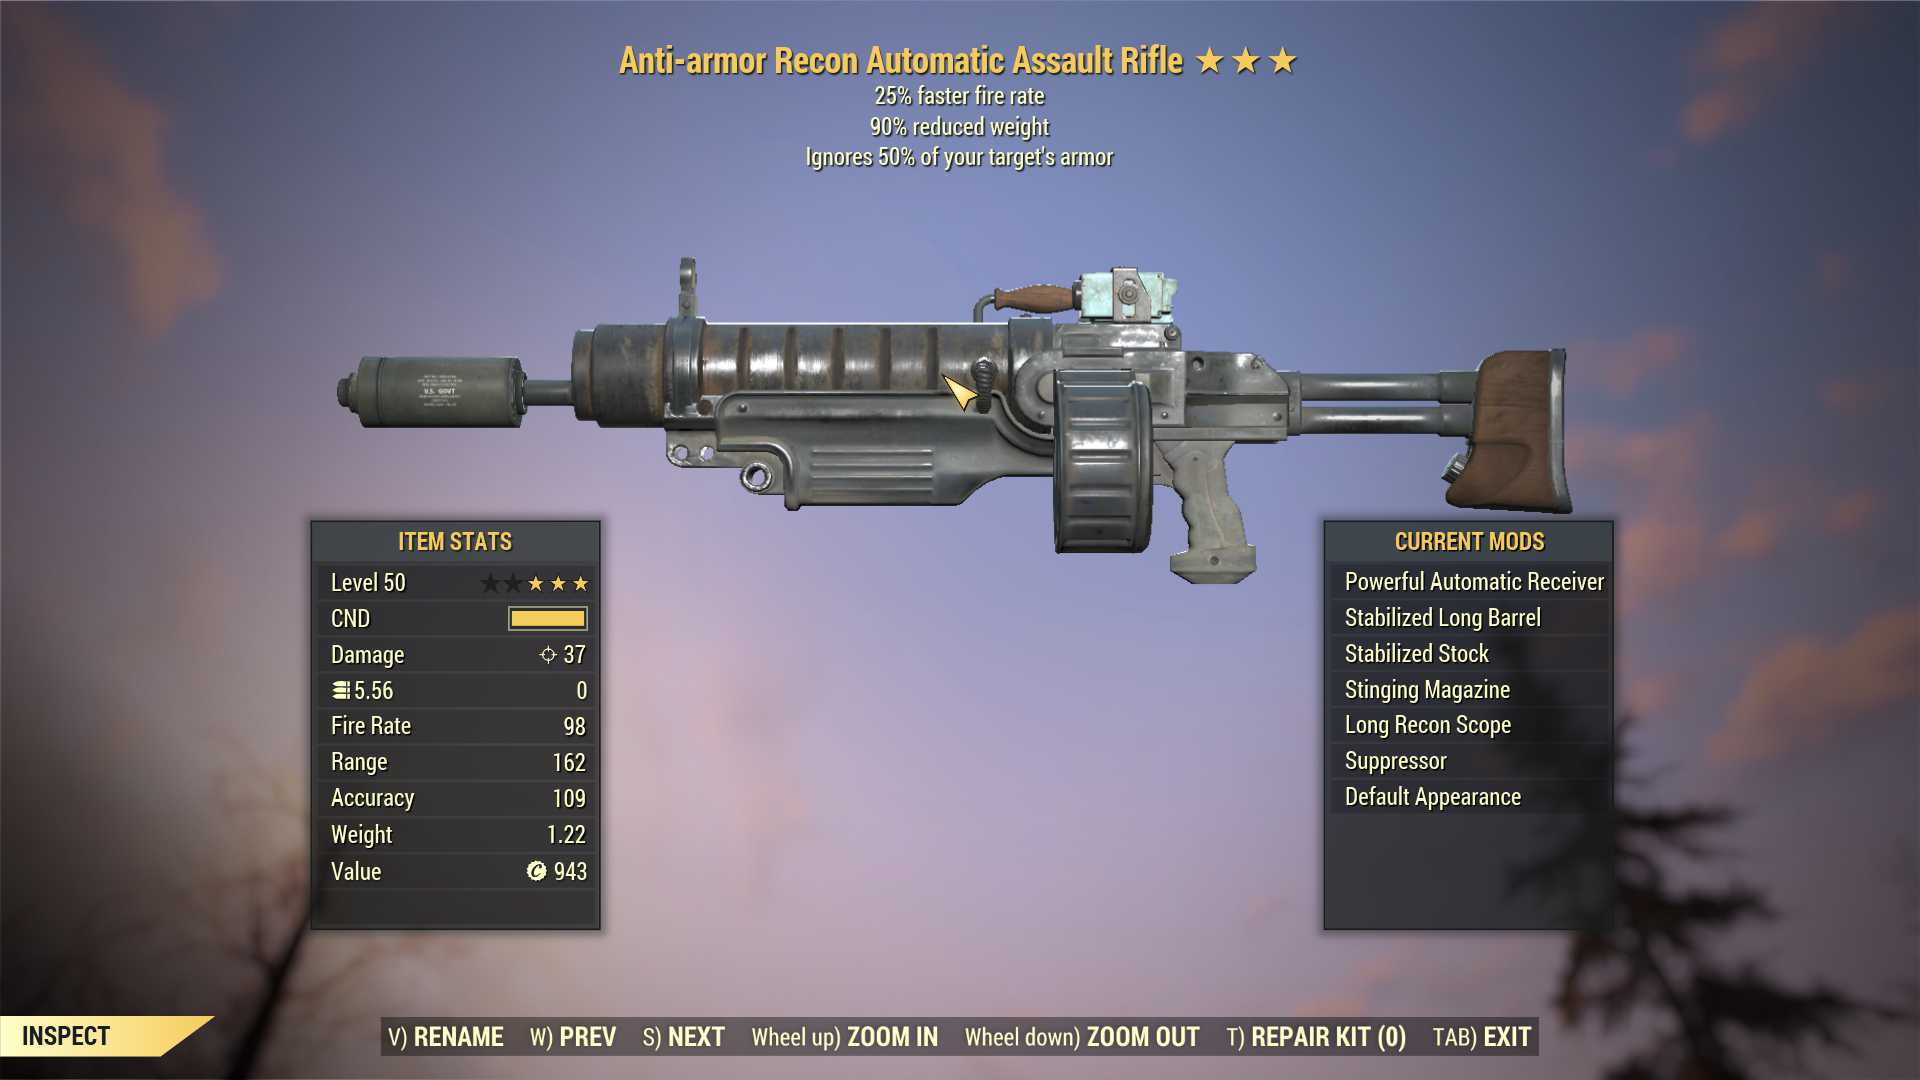 Anti-Armor Assault Rifle (25% faster fire rate, 90% reduced weight)